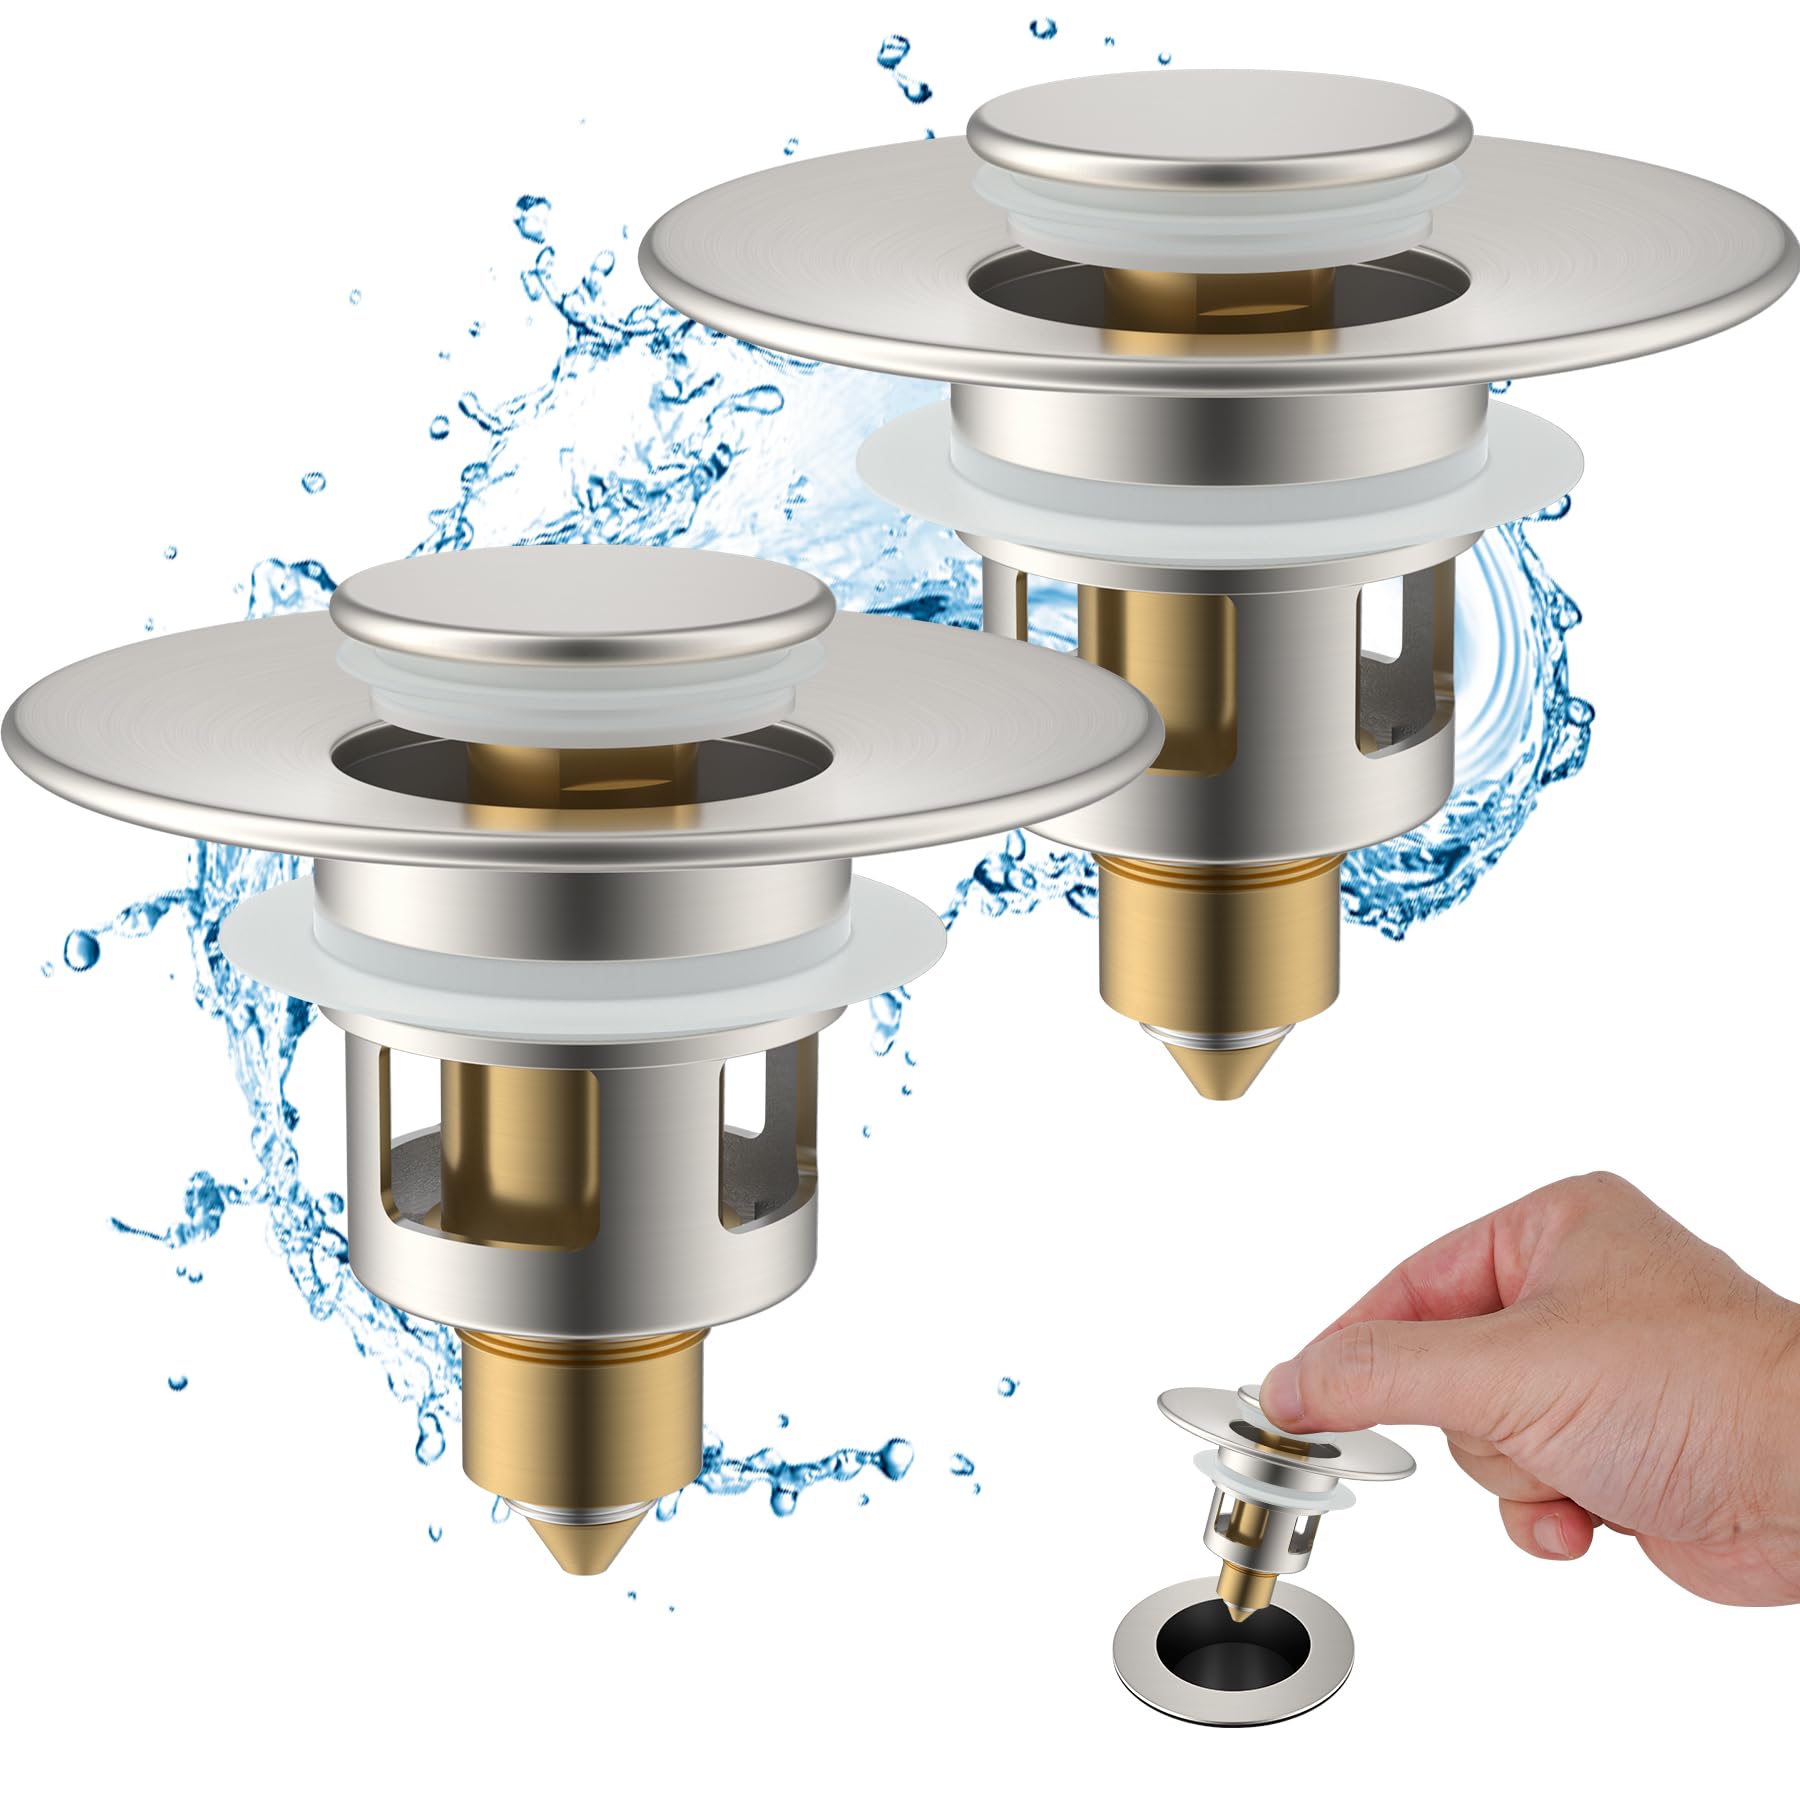 Hibbent 2 Pack All Metal Universal Bathroom Sink Stopper, for 1''~1.8'' Basin Pop Up Sink Drain Strainer, Upgraded Brass Bullet Core Push Type Sink Stopper, Anti Clogging Drain Filter, Brushed Nickel